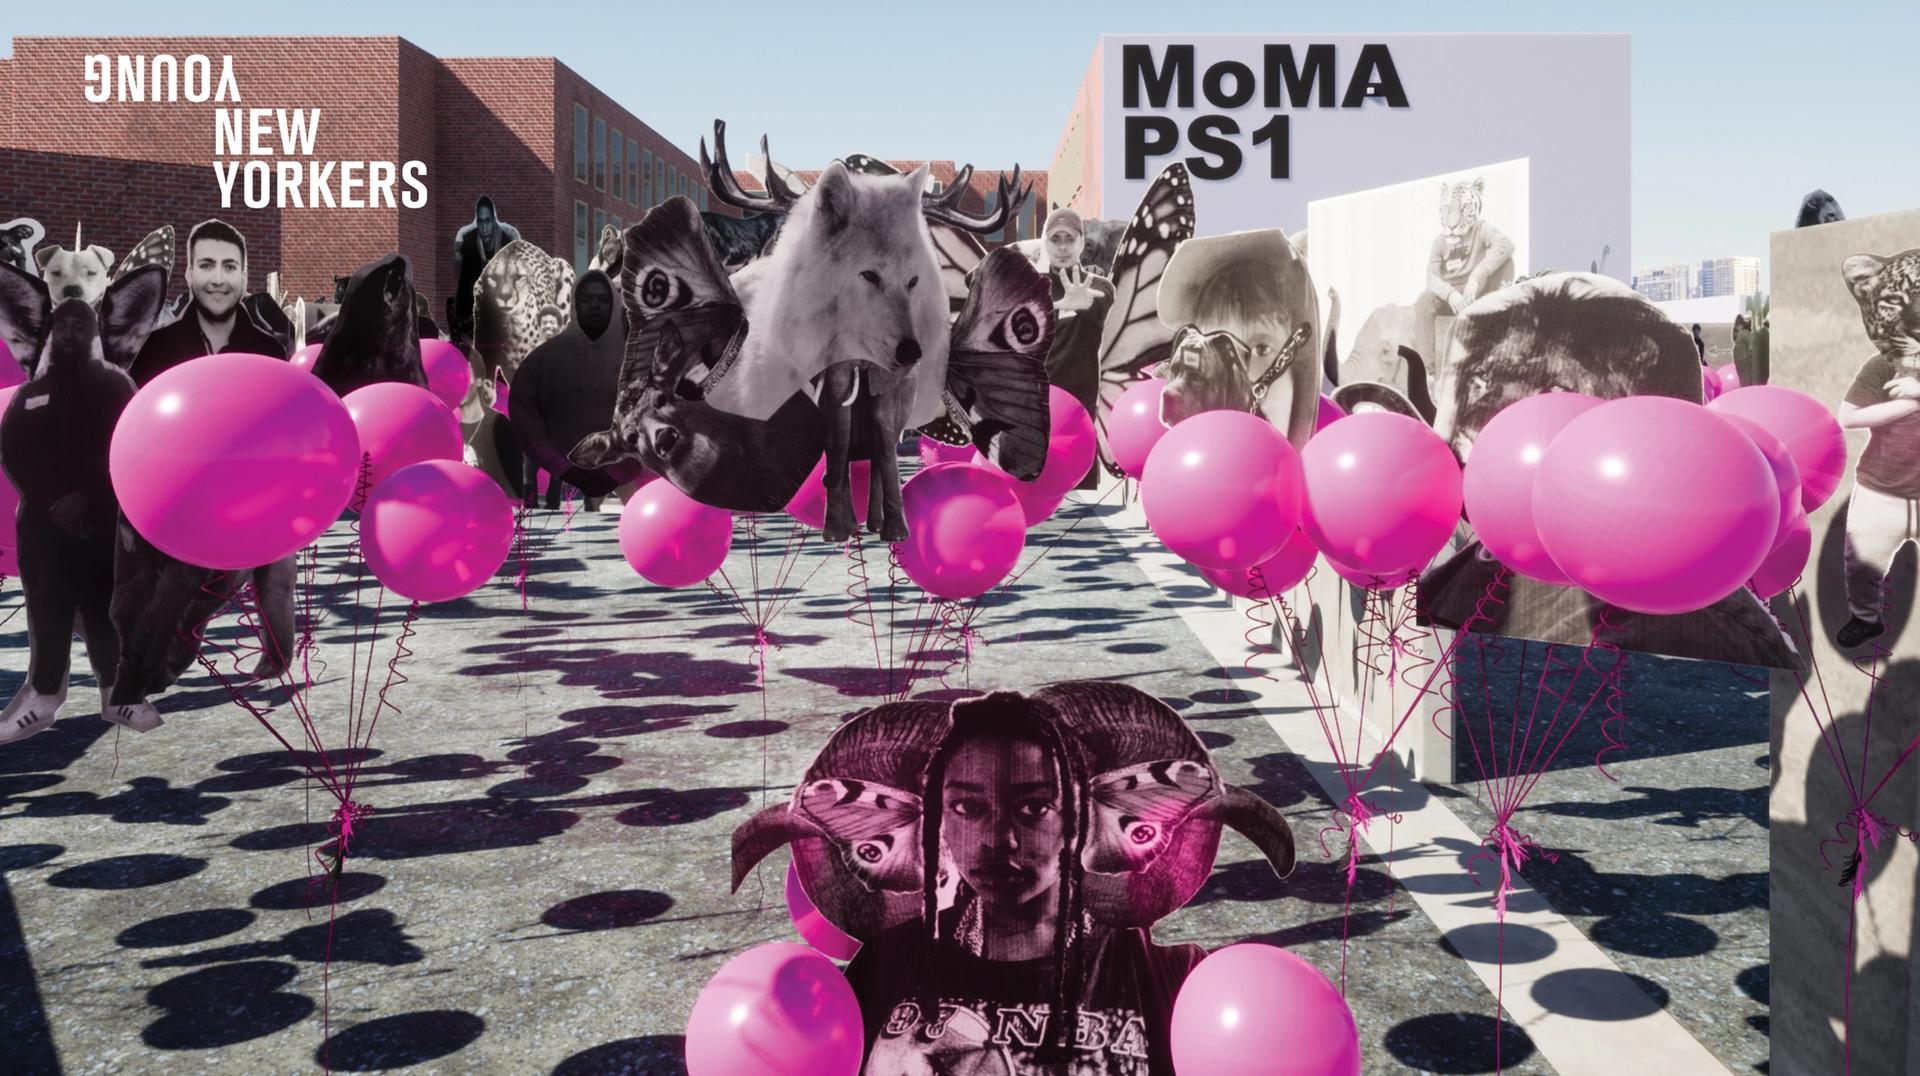 Graduates of the programmes Project Reset and Young New Yorkers have taken part in a virtual exhibition with MoMA PS1 